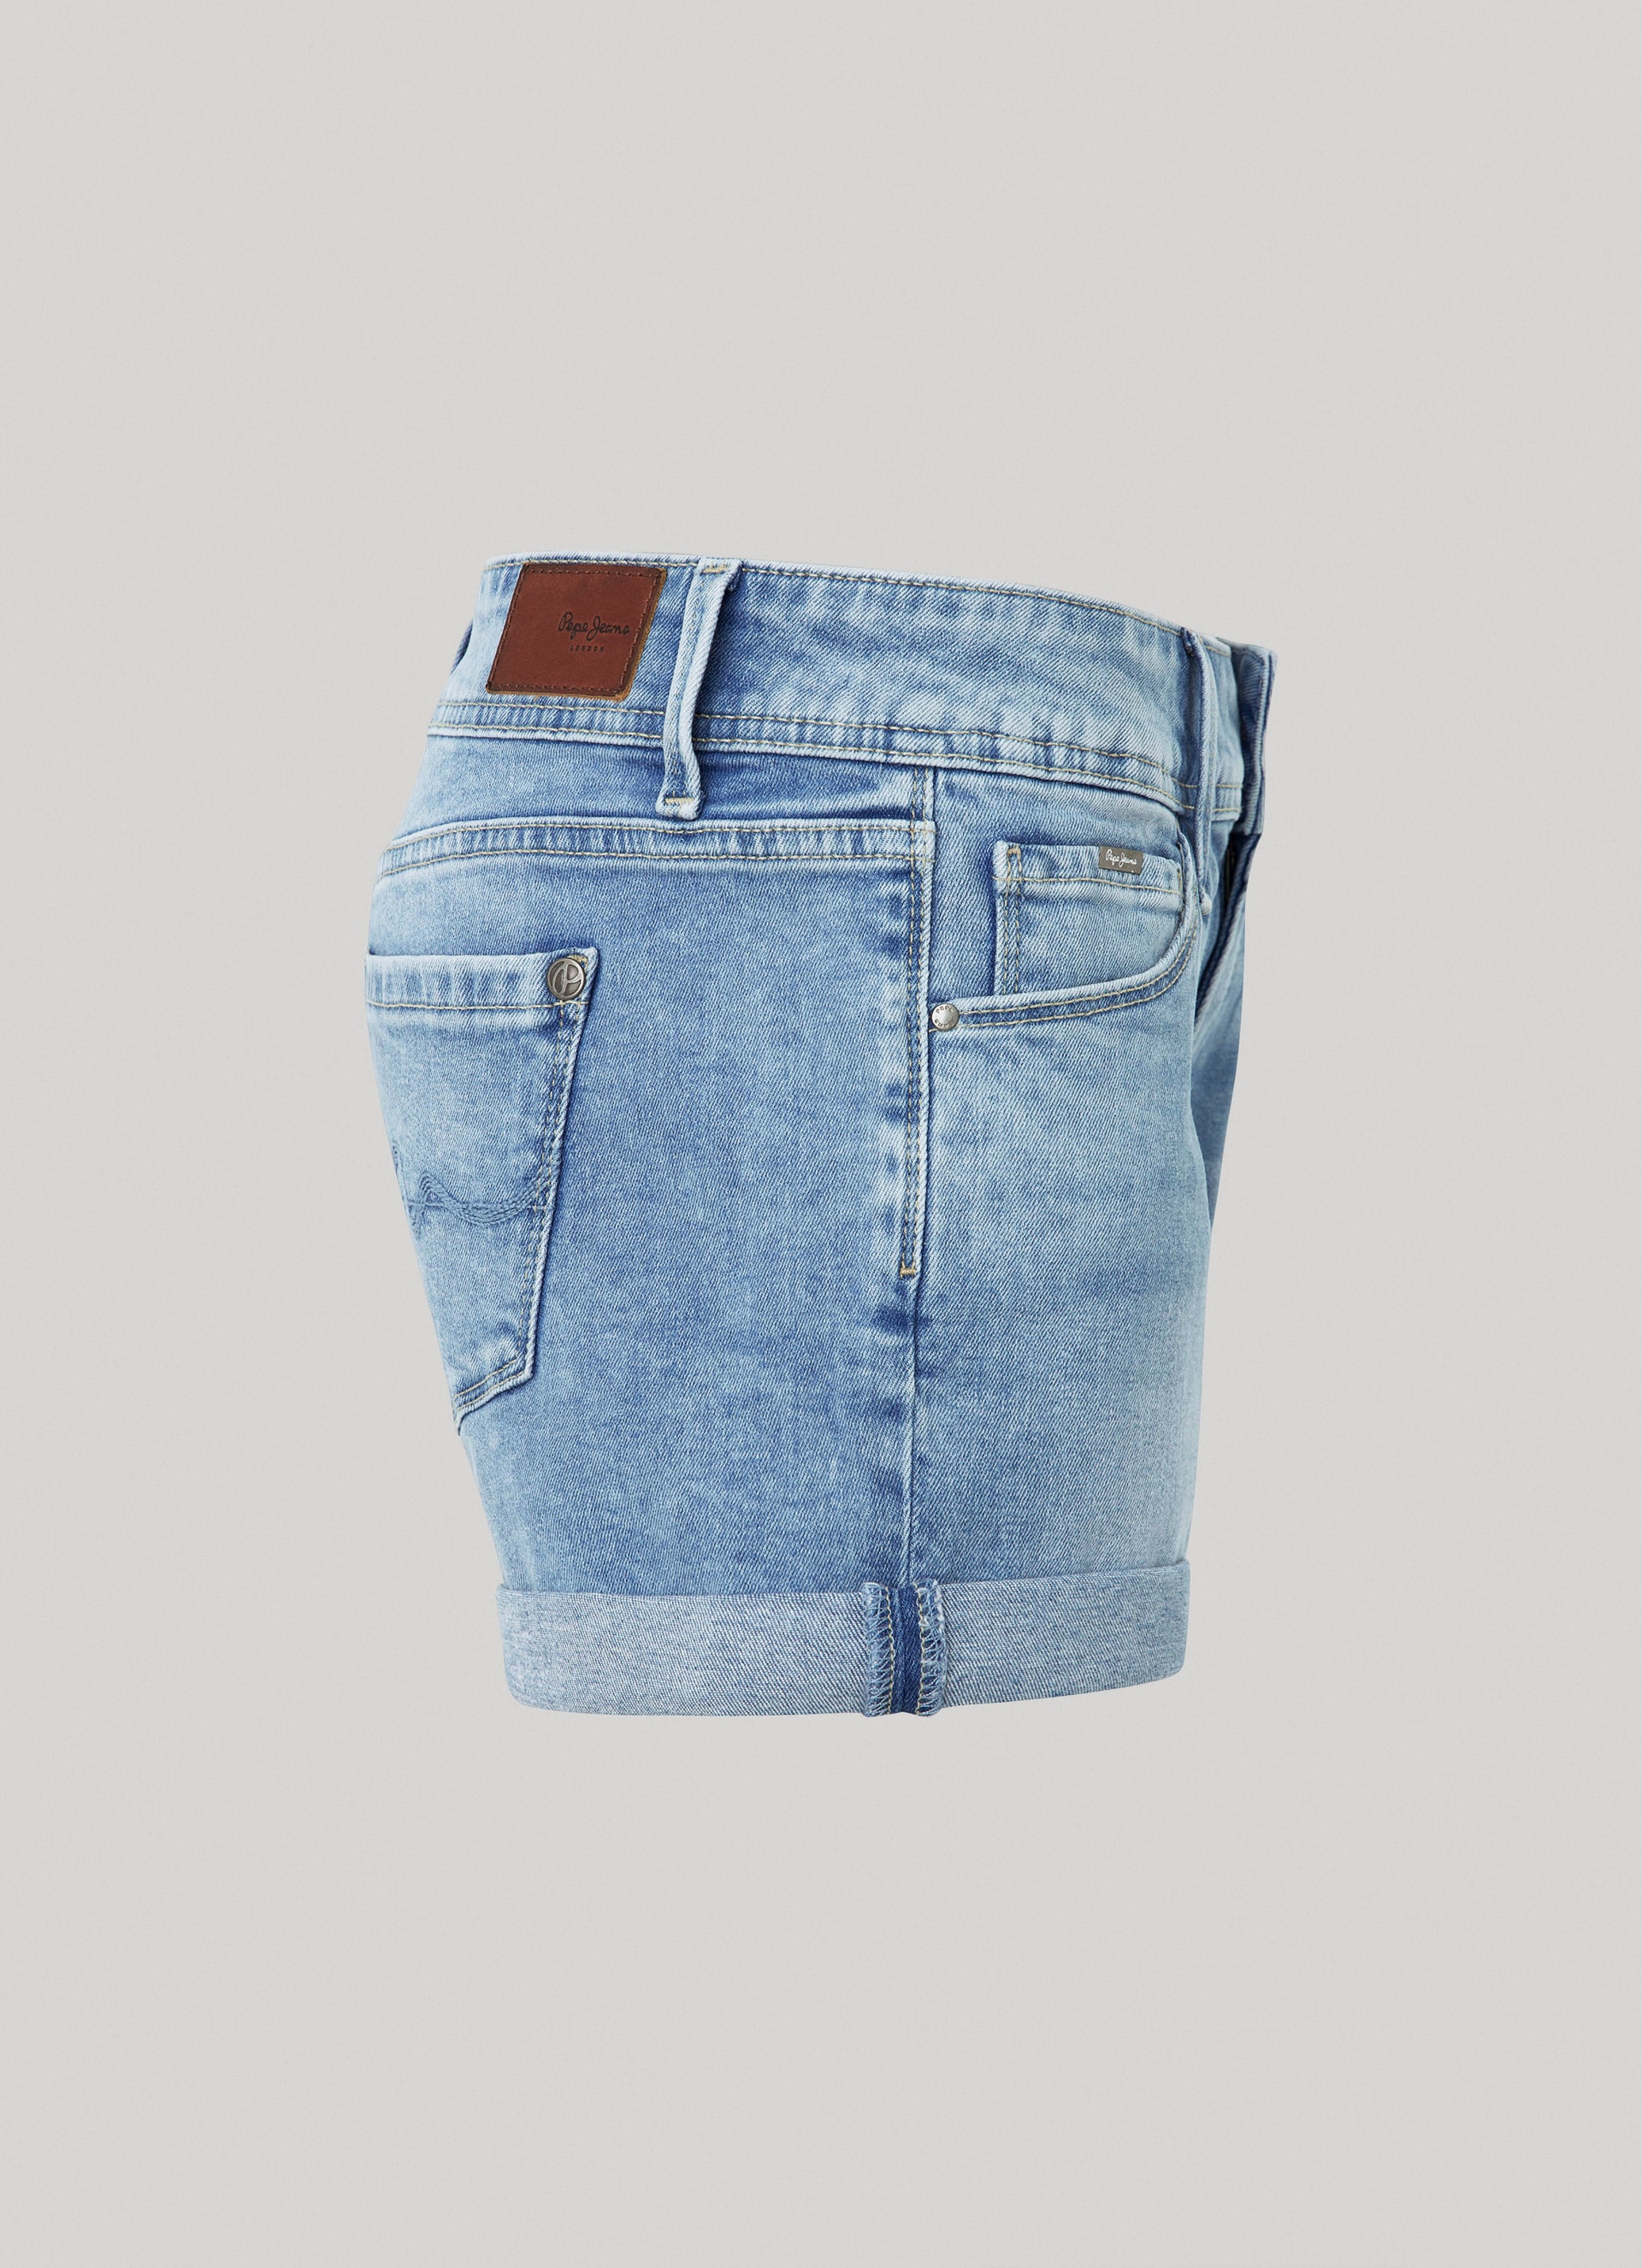 Pepe Jeans Jeansshorts, mit Umschlagsaum